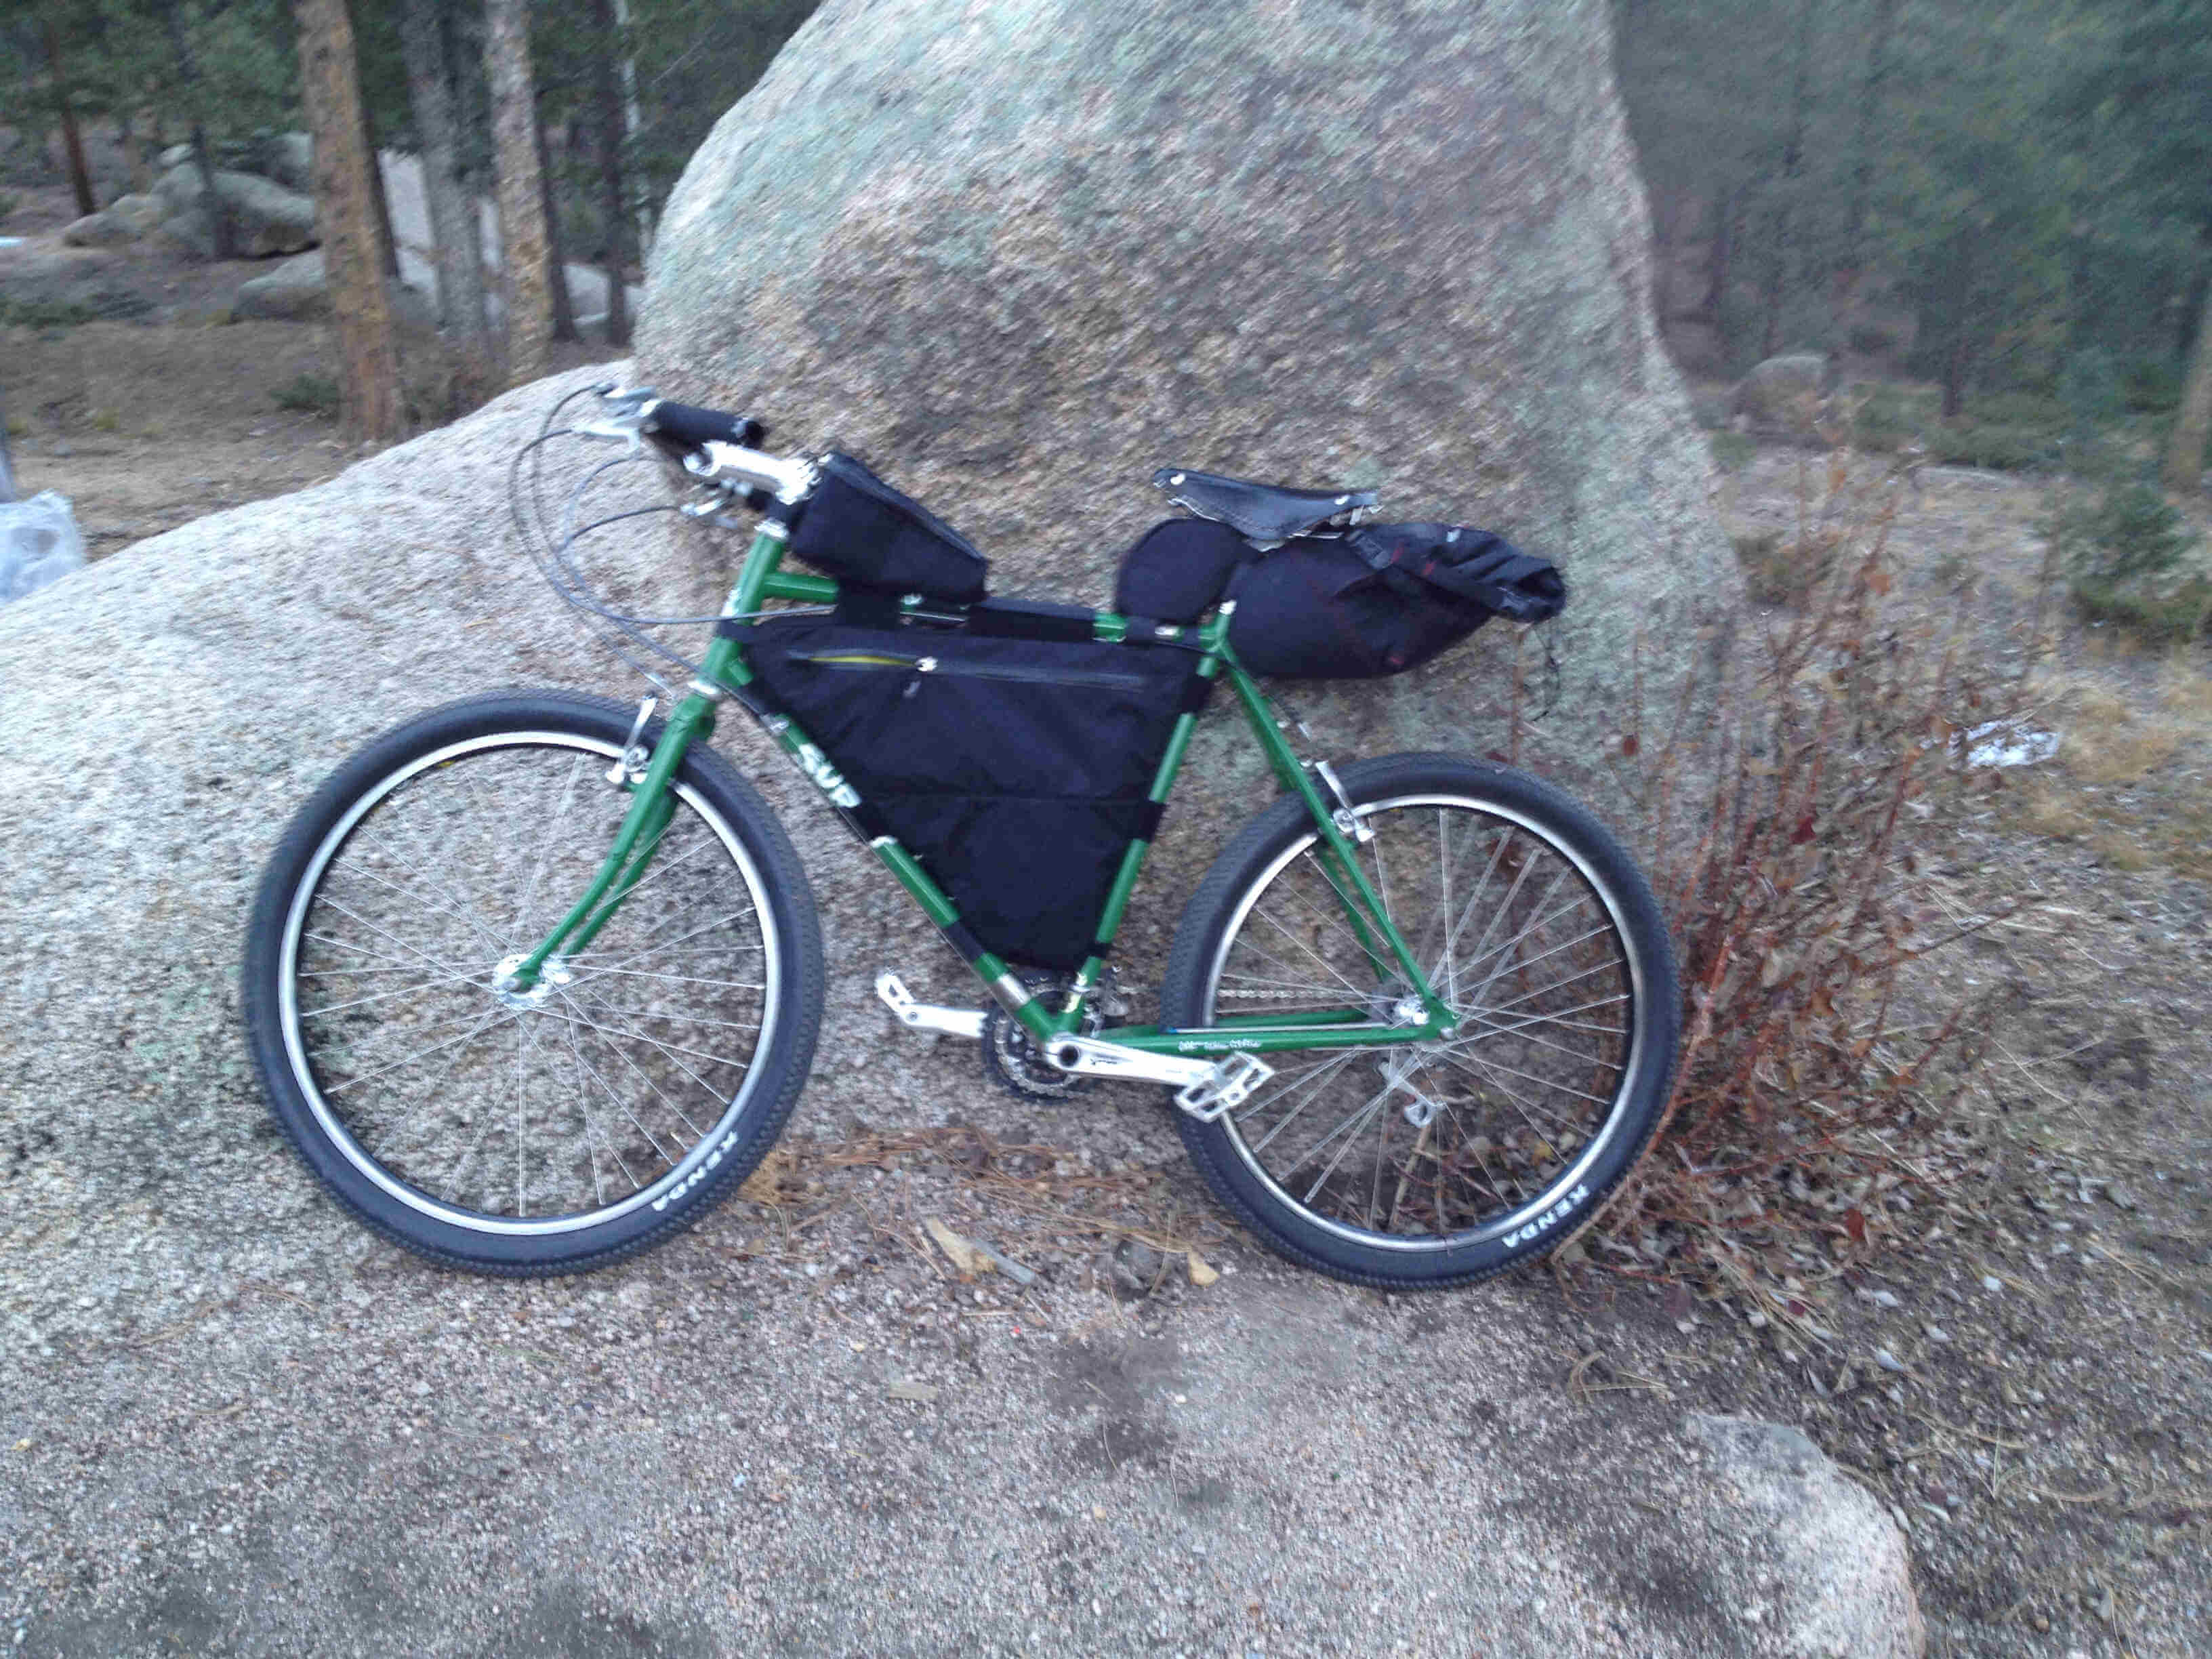 Left side view of a green Surly bike with gear packs, leaning against a large boulder, with a forest behind it